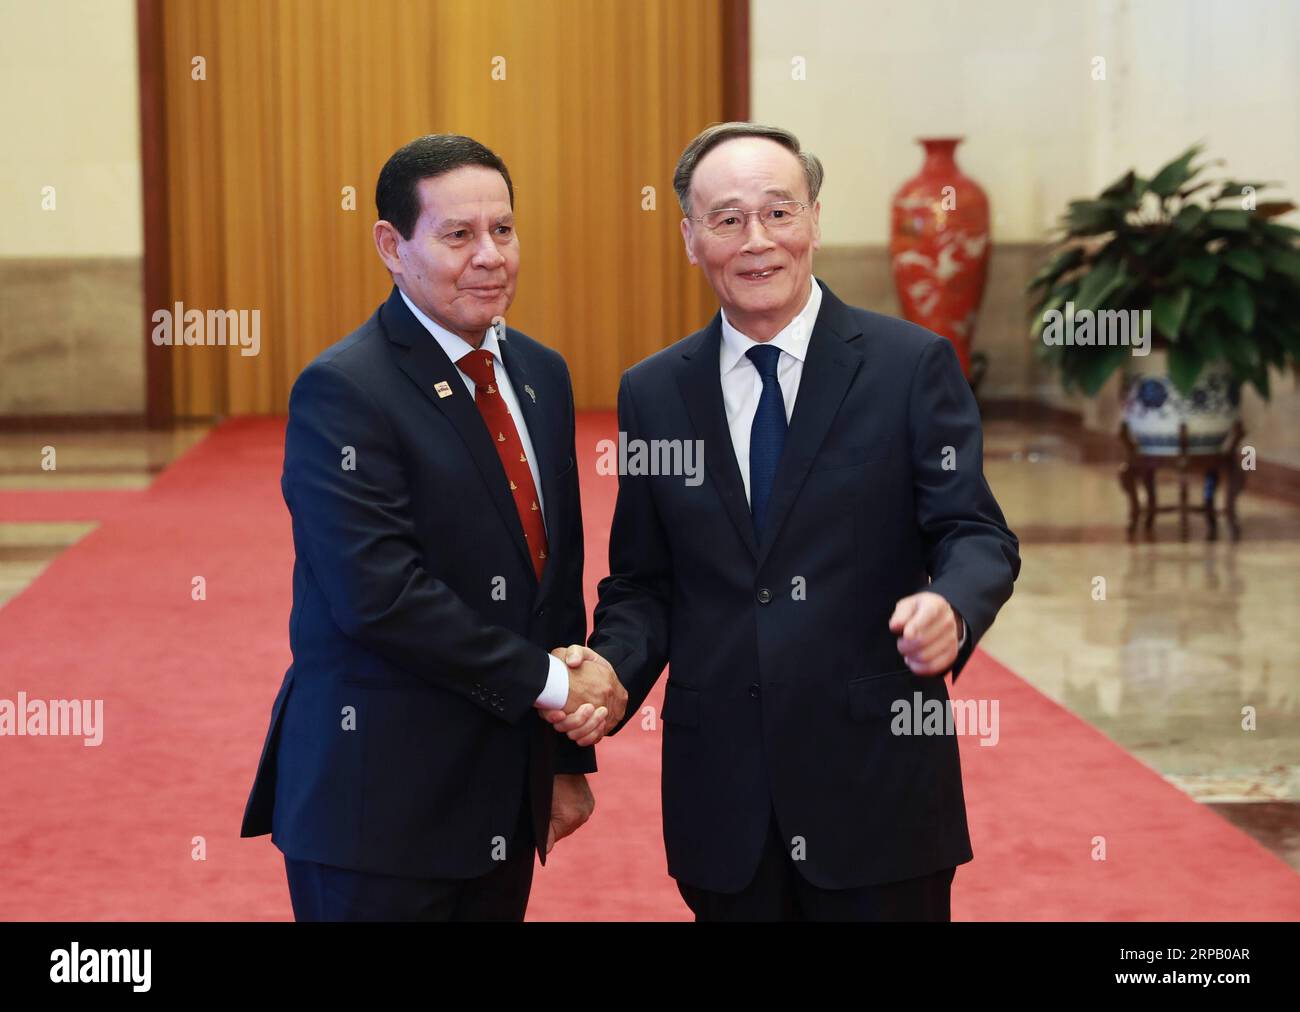 (190523) -- BEIJING, May 23, 2019 (Xinhua) -- Chinese Vice President Wang Qishan and Brazil s Vice President Hamilton Mourao hold talks and co-chair the fifth meeting of the China-Brazil High-Level Coordination and Cooperation Committee (COSBAN) at the Great Hall of the People in Beijing, capital of China, May 23, 2019. (Xinhua/Pang Xinglei) CHINA-BEIJING-WANG QISHAN-BRAZIL-VP-TALKS-COSBAN-MEETING (CN) PUBLICATIONxNOTxINxCHN Stock Photo